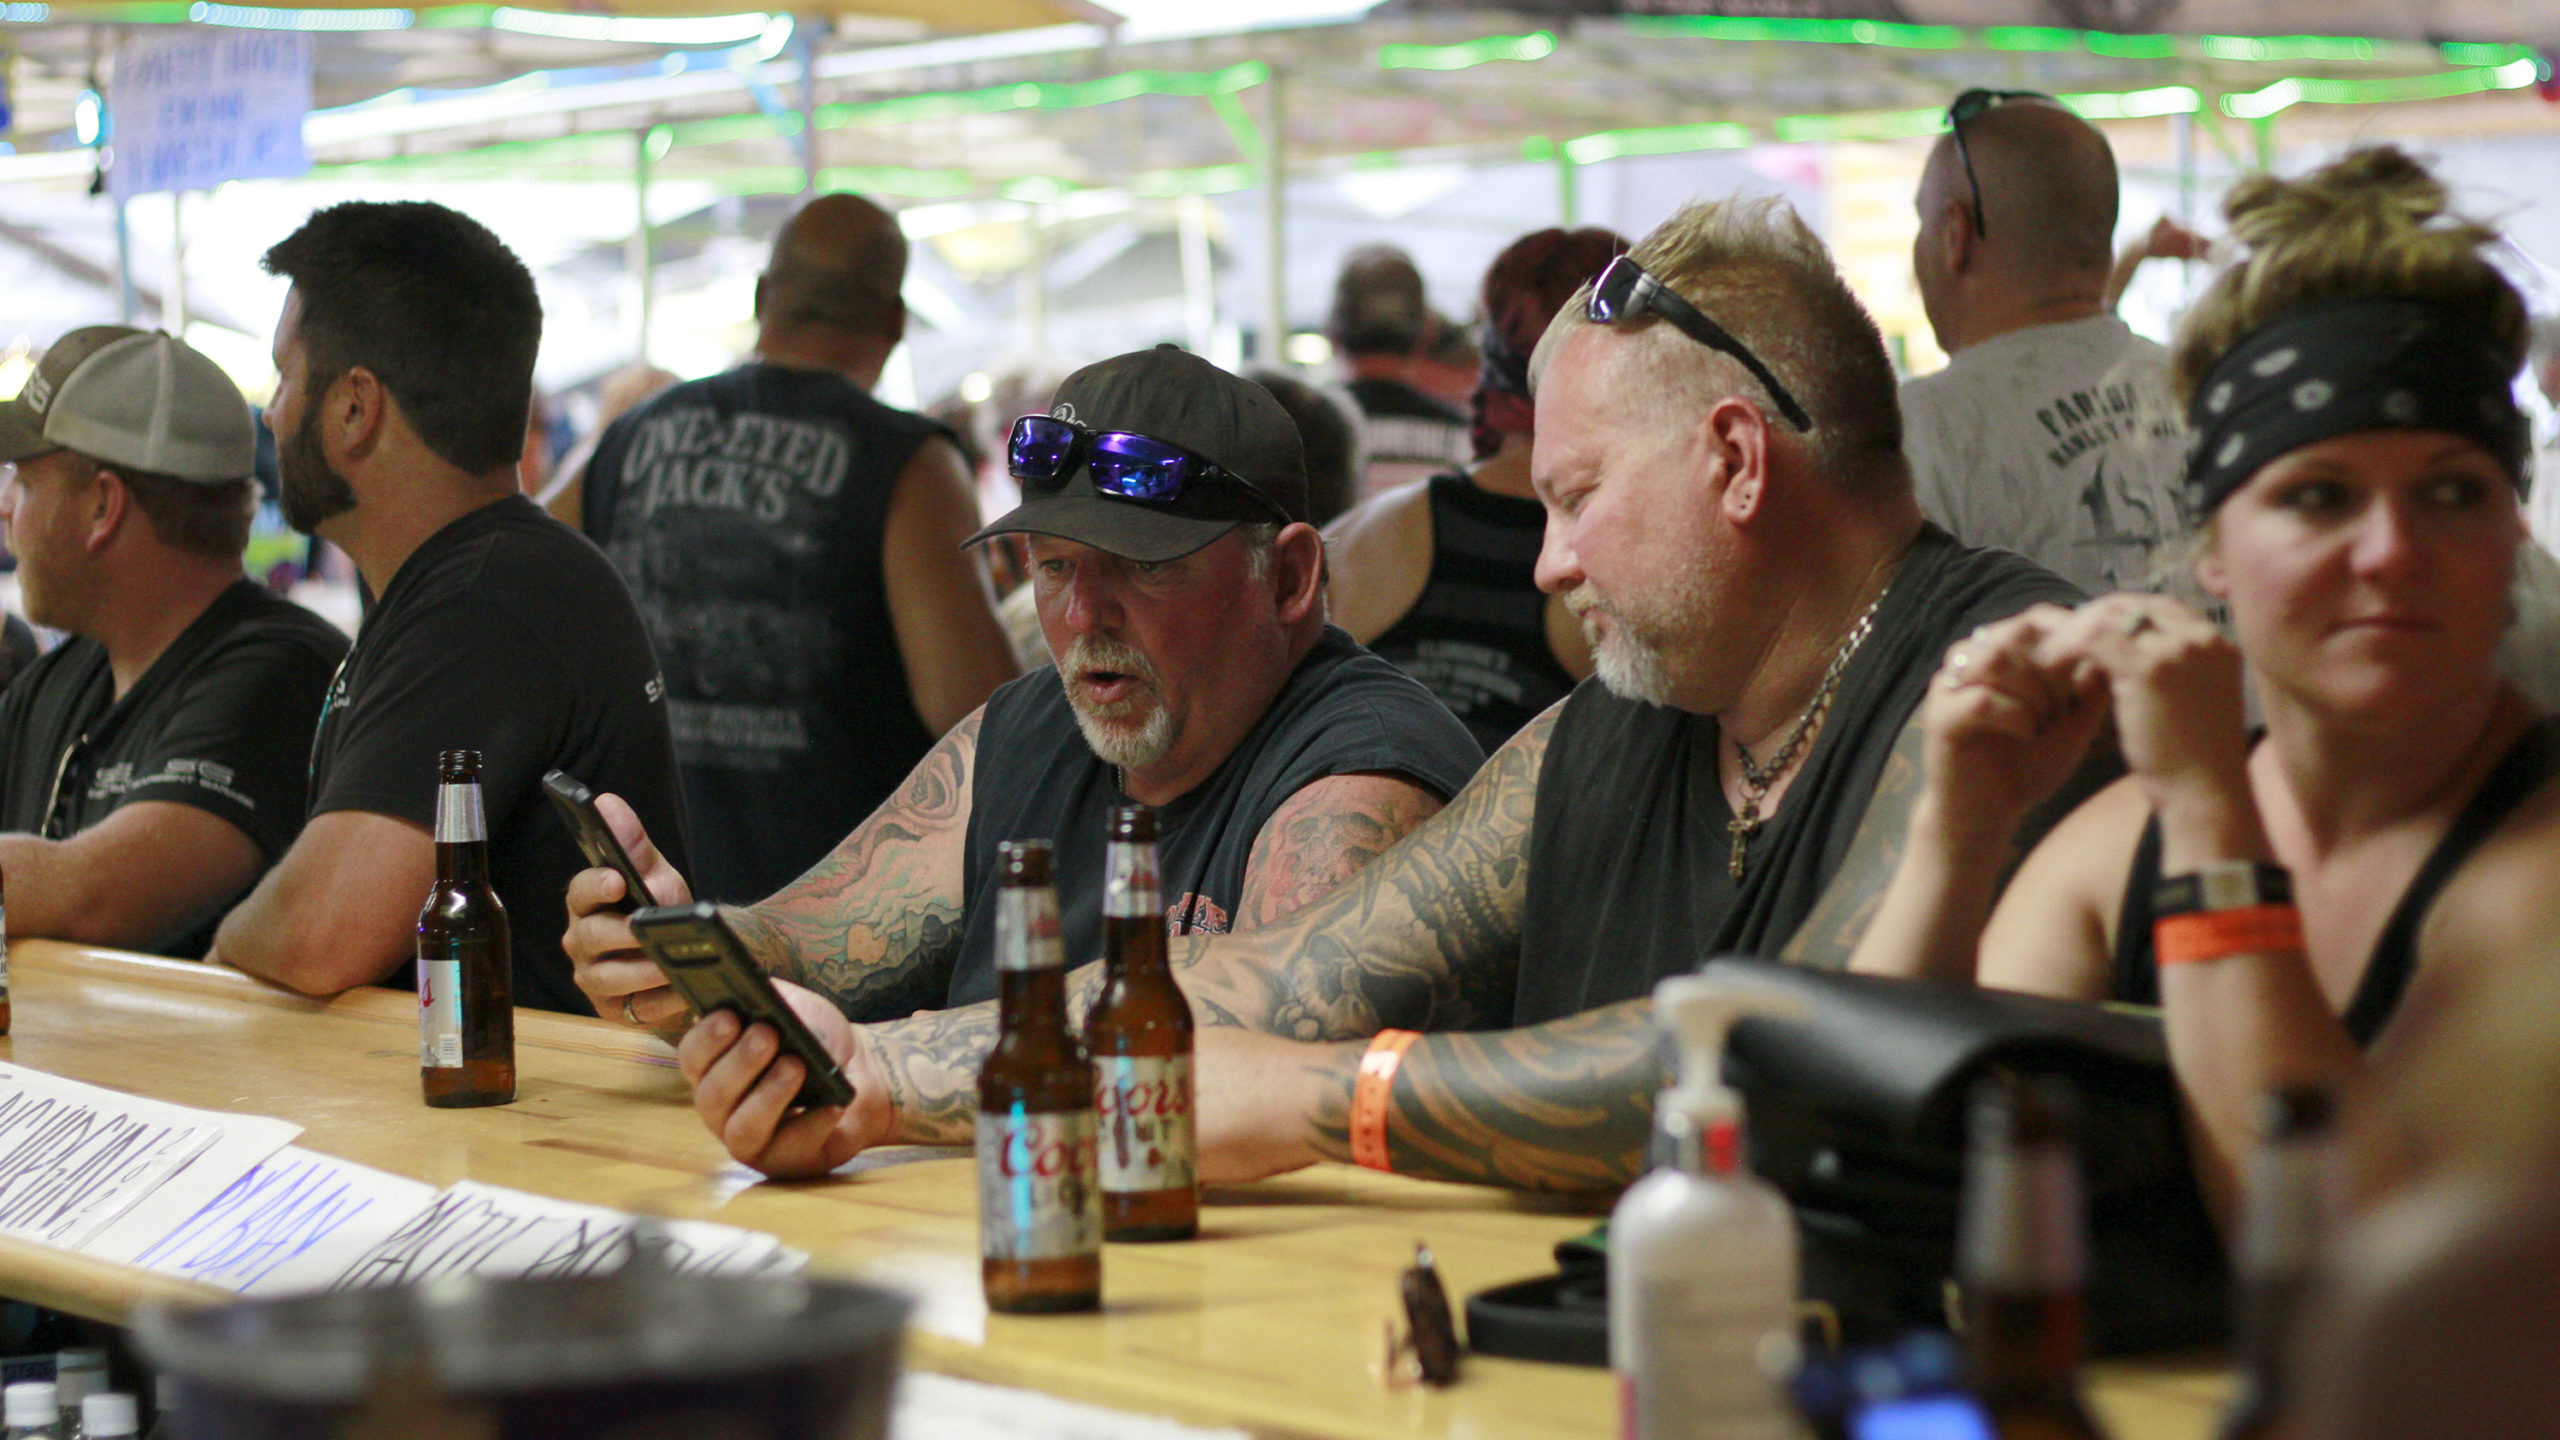 A group of bikers present at the 2021 Sturgis Motorcycle Rally